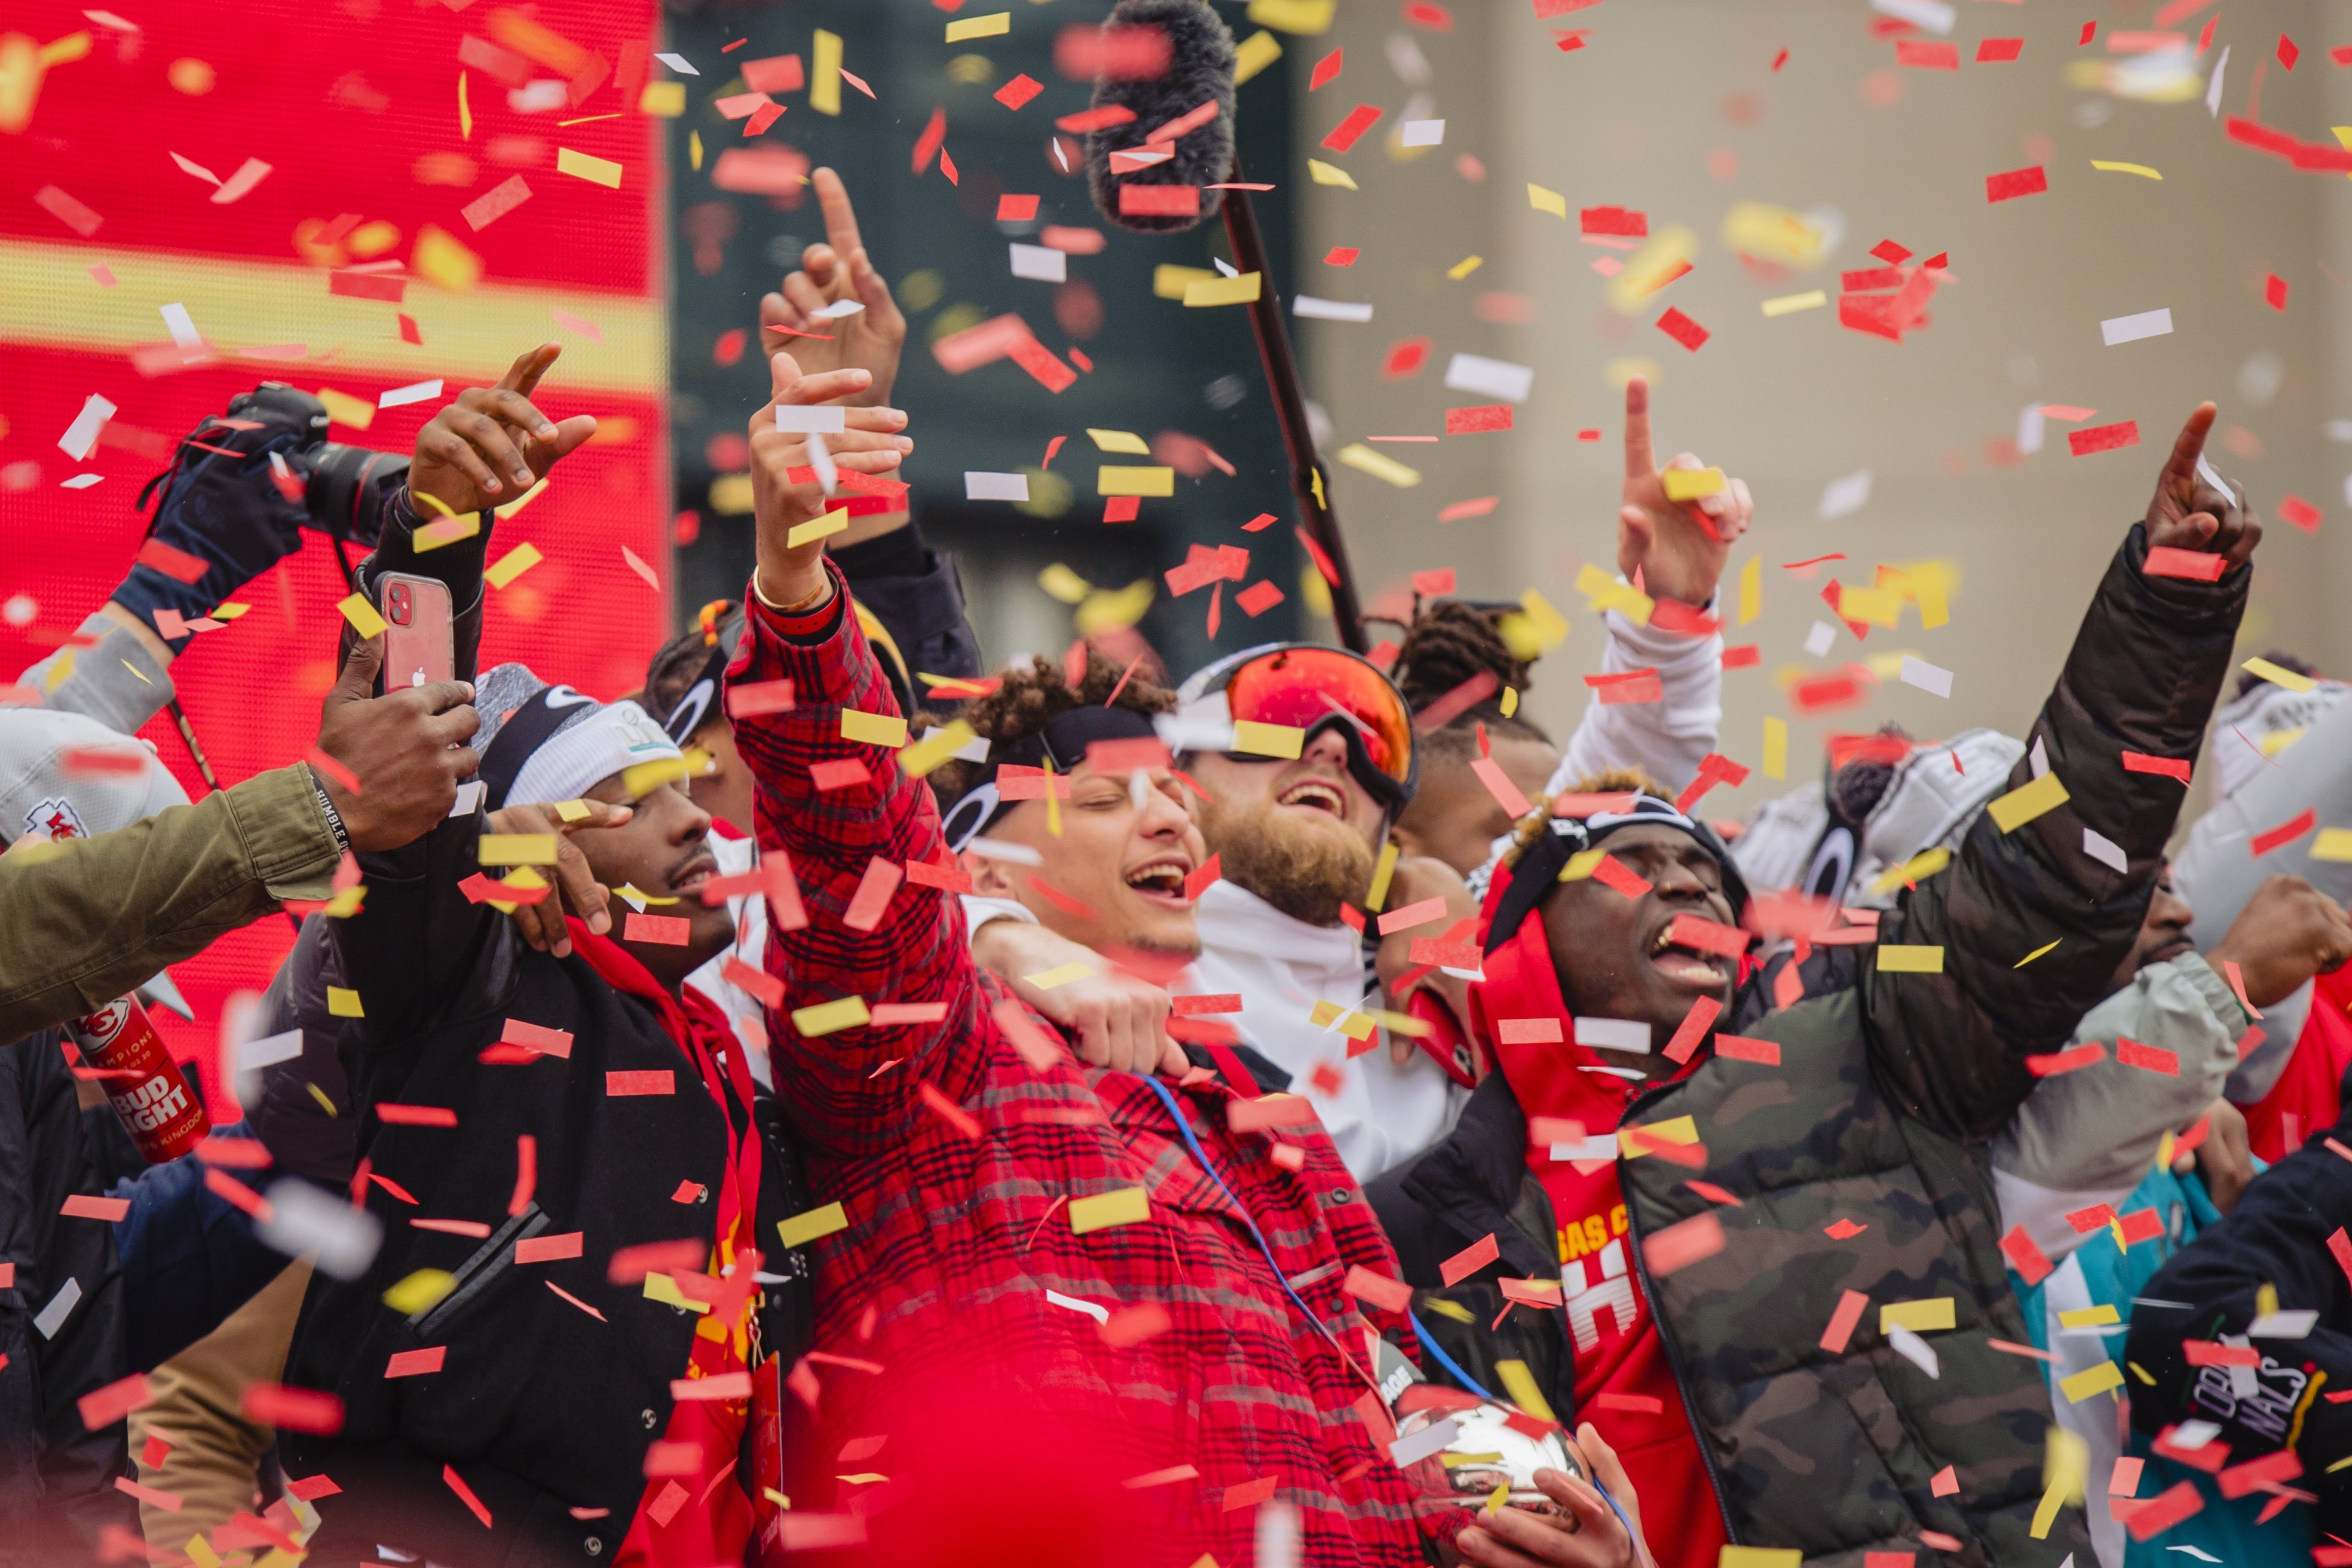  Patrick Mahomes #15 of the Kansas City Chiefs celebrates with the Super Bowl MVP trophy during the Kansas City Chiefs Victory Parade on February 5, 2020 | Photo: Getty Images